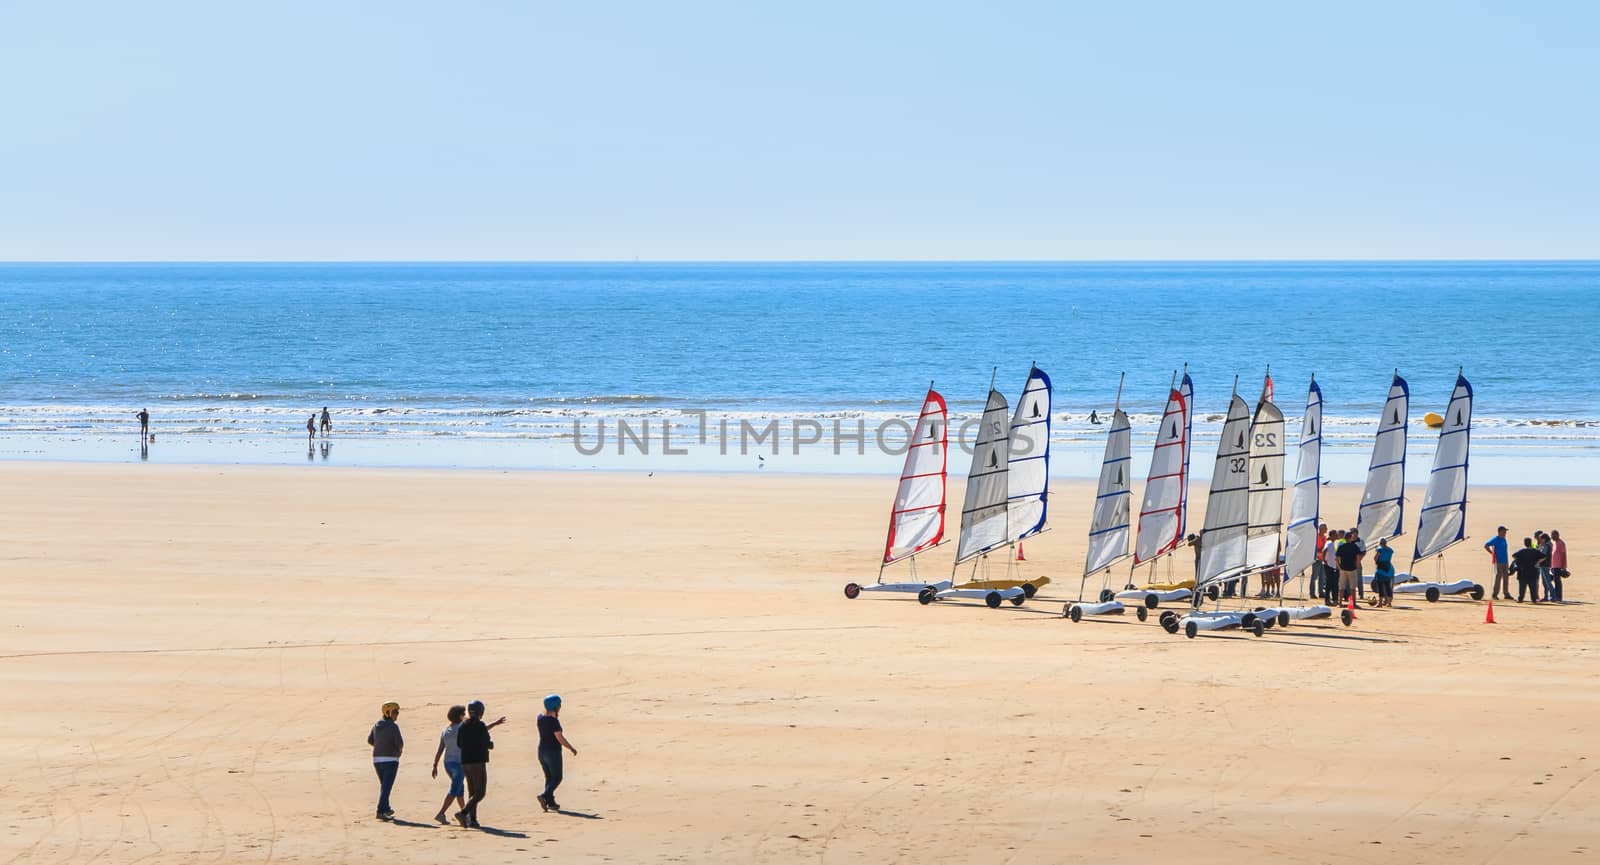 group of people taking a lesson of sand yachting by AtlanticEUROSTOXX